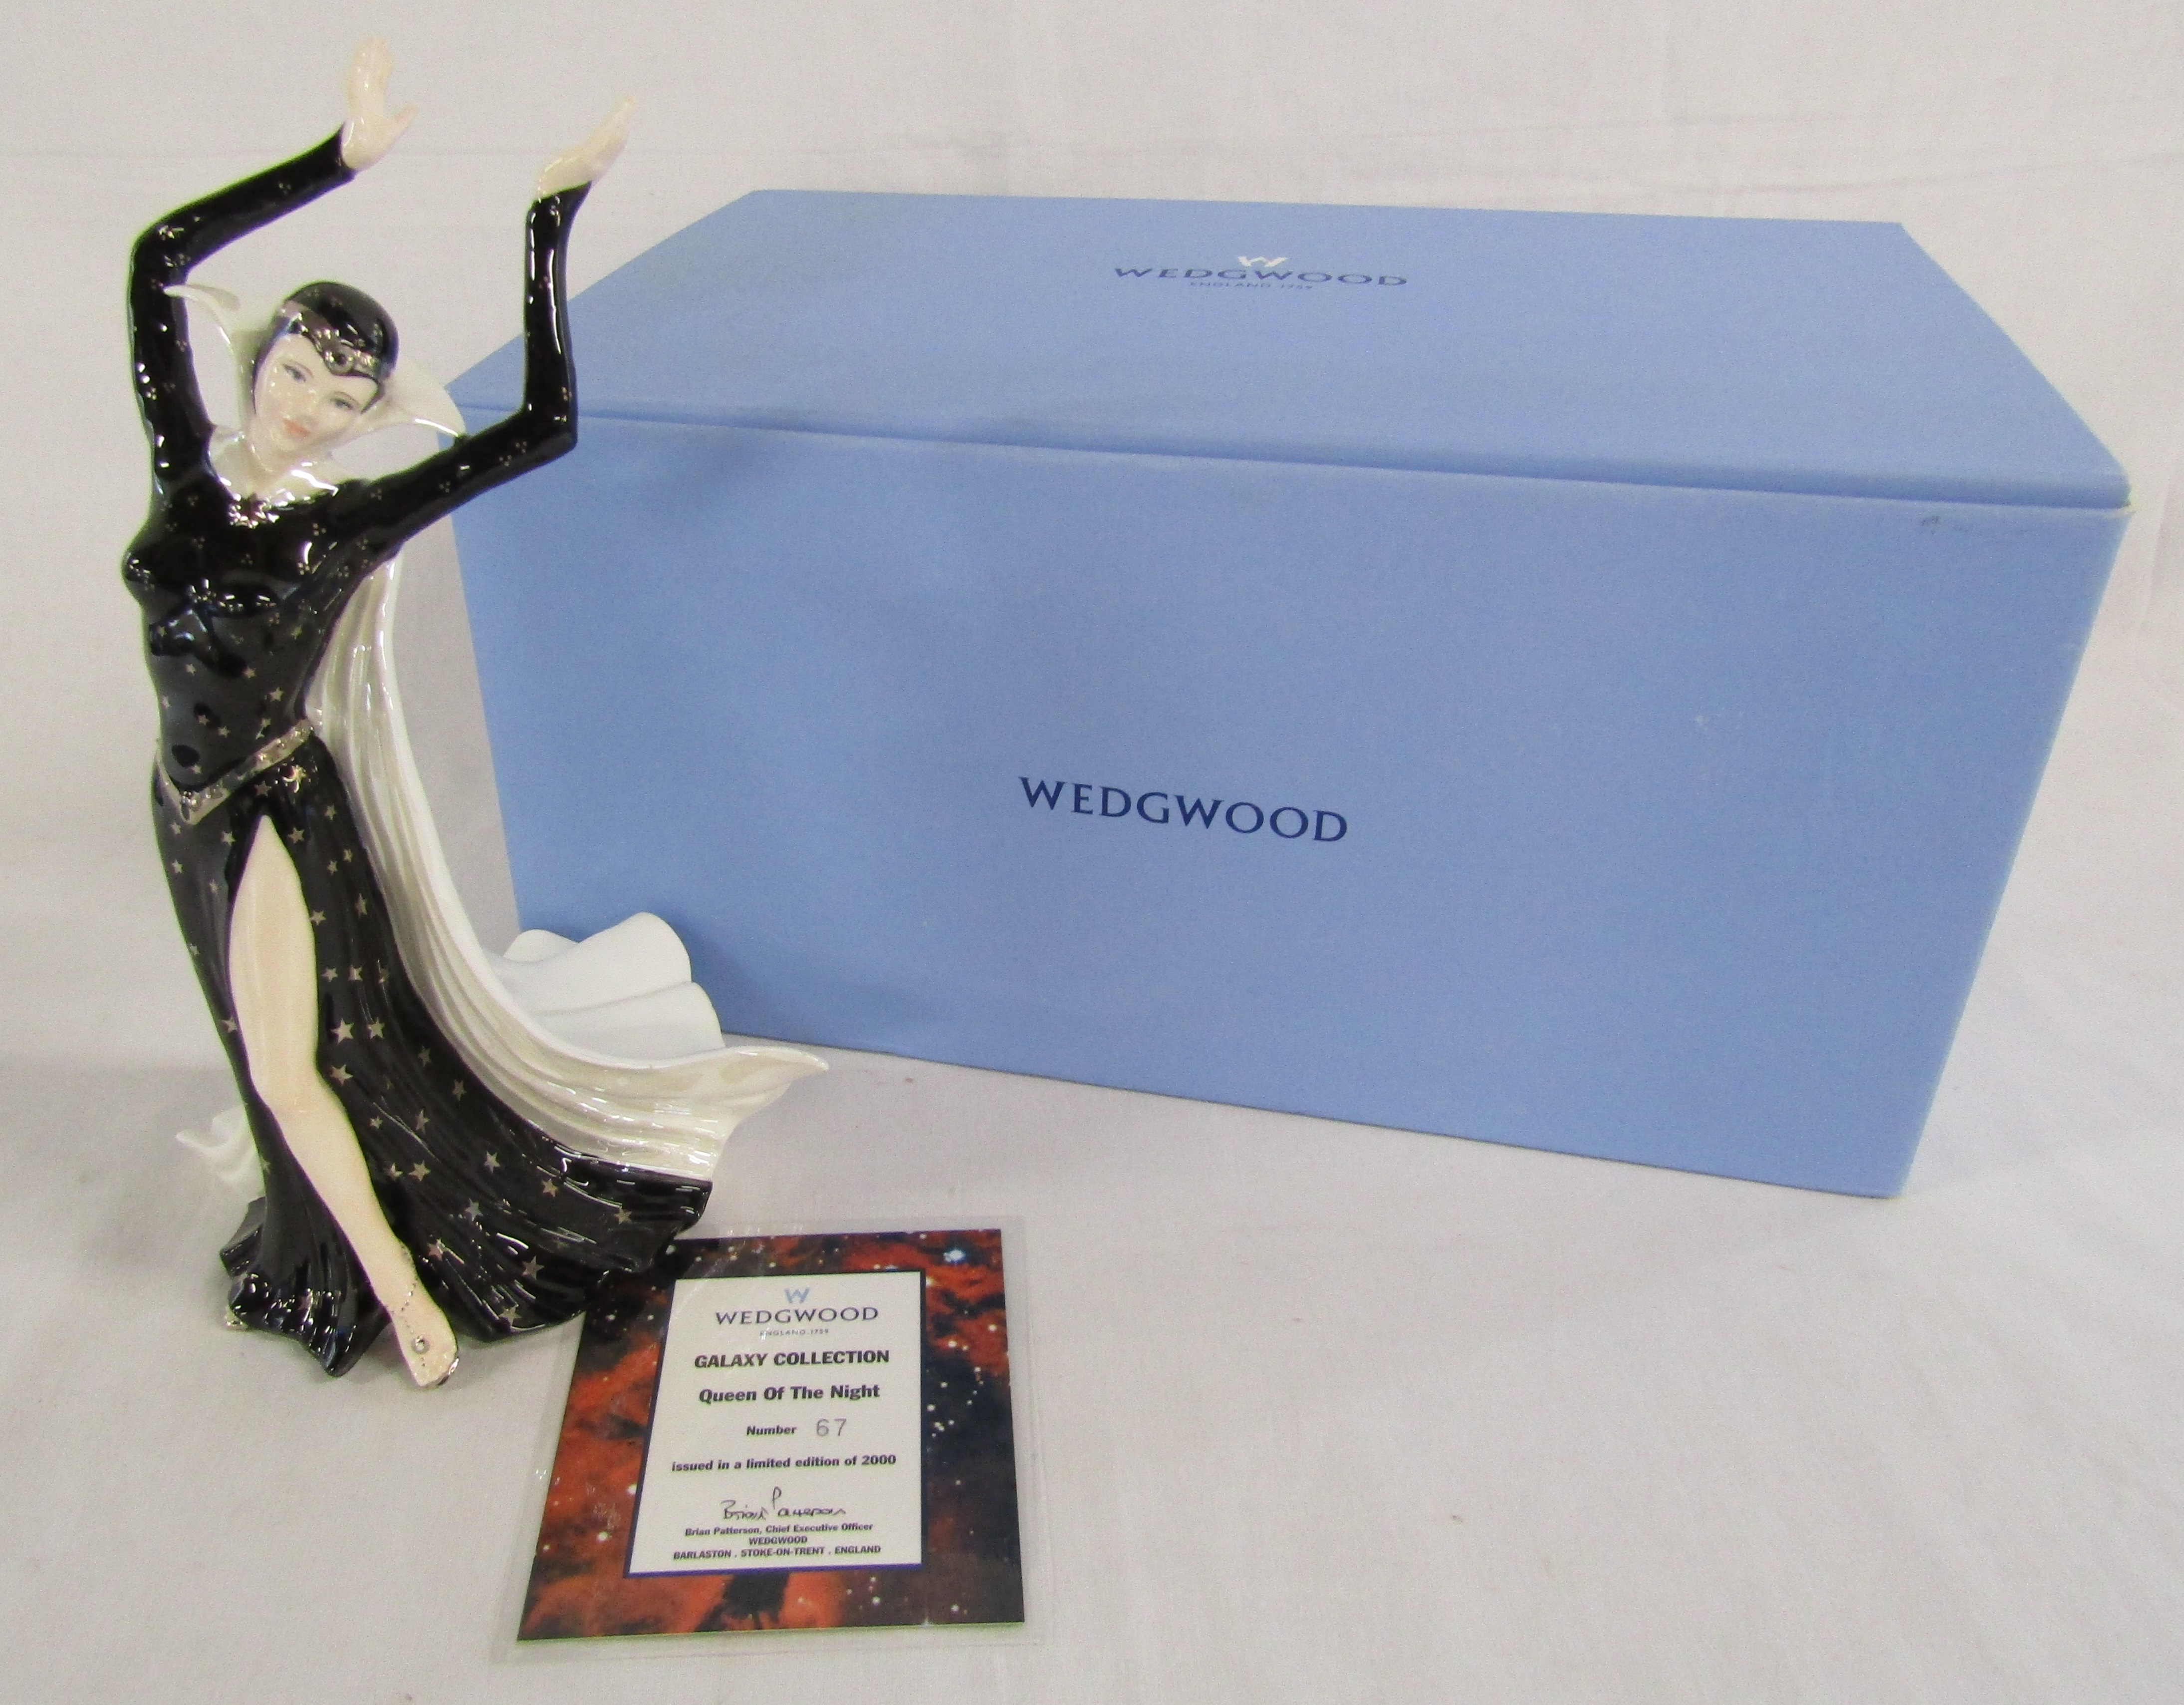 Wedgwood Galaxy Collection 'Queen of the Night' limited edition 67/2000 figurine